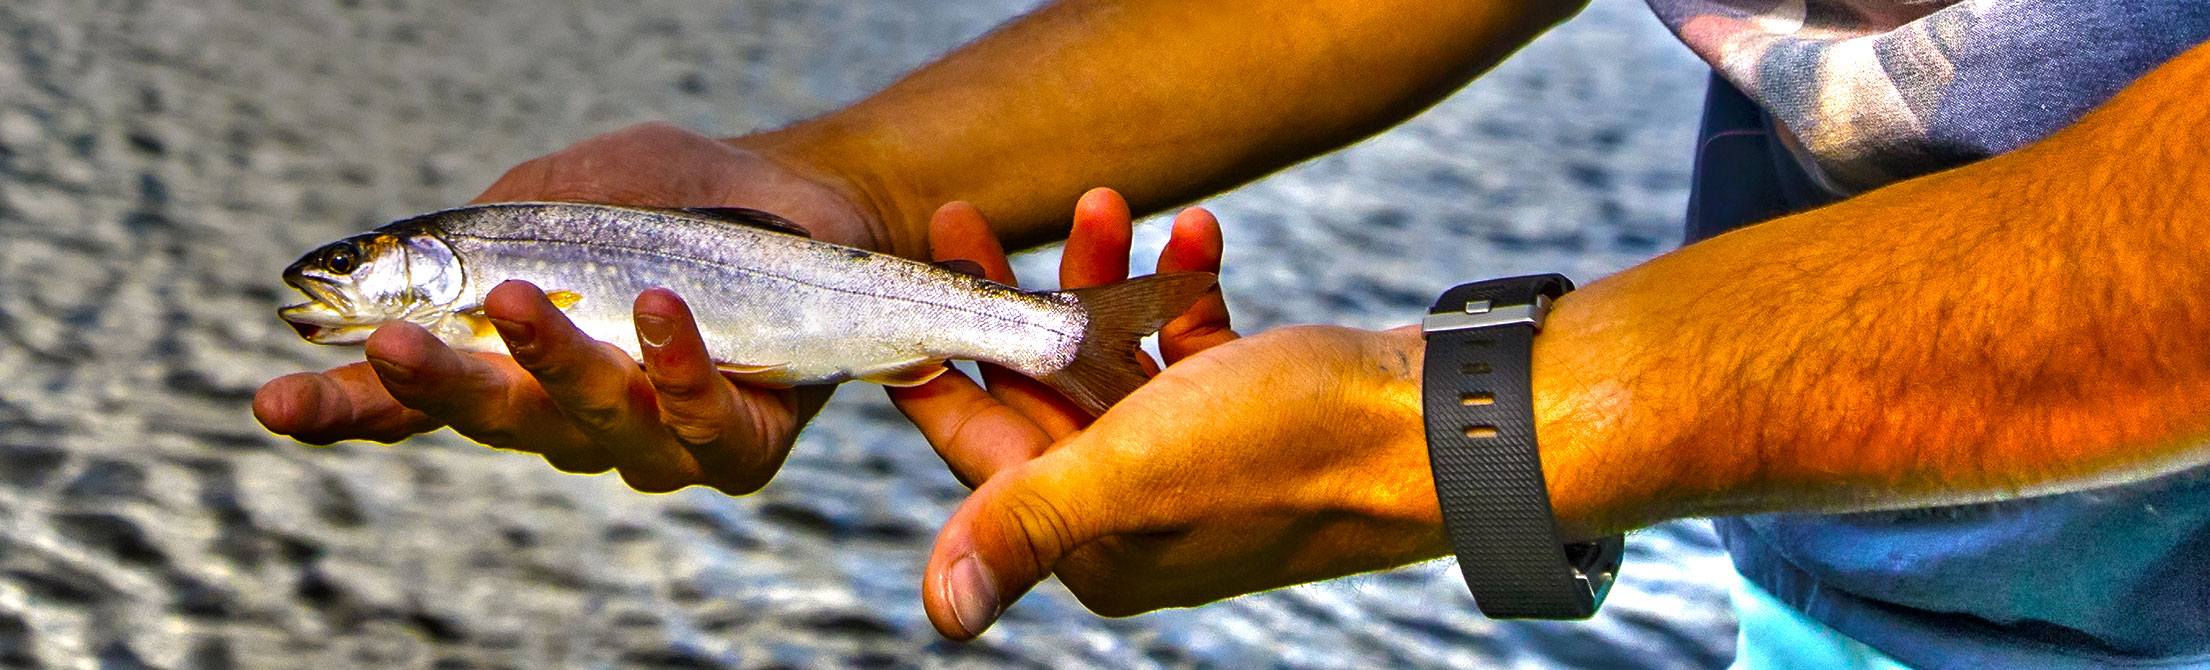 hands holding fish